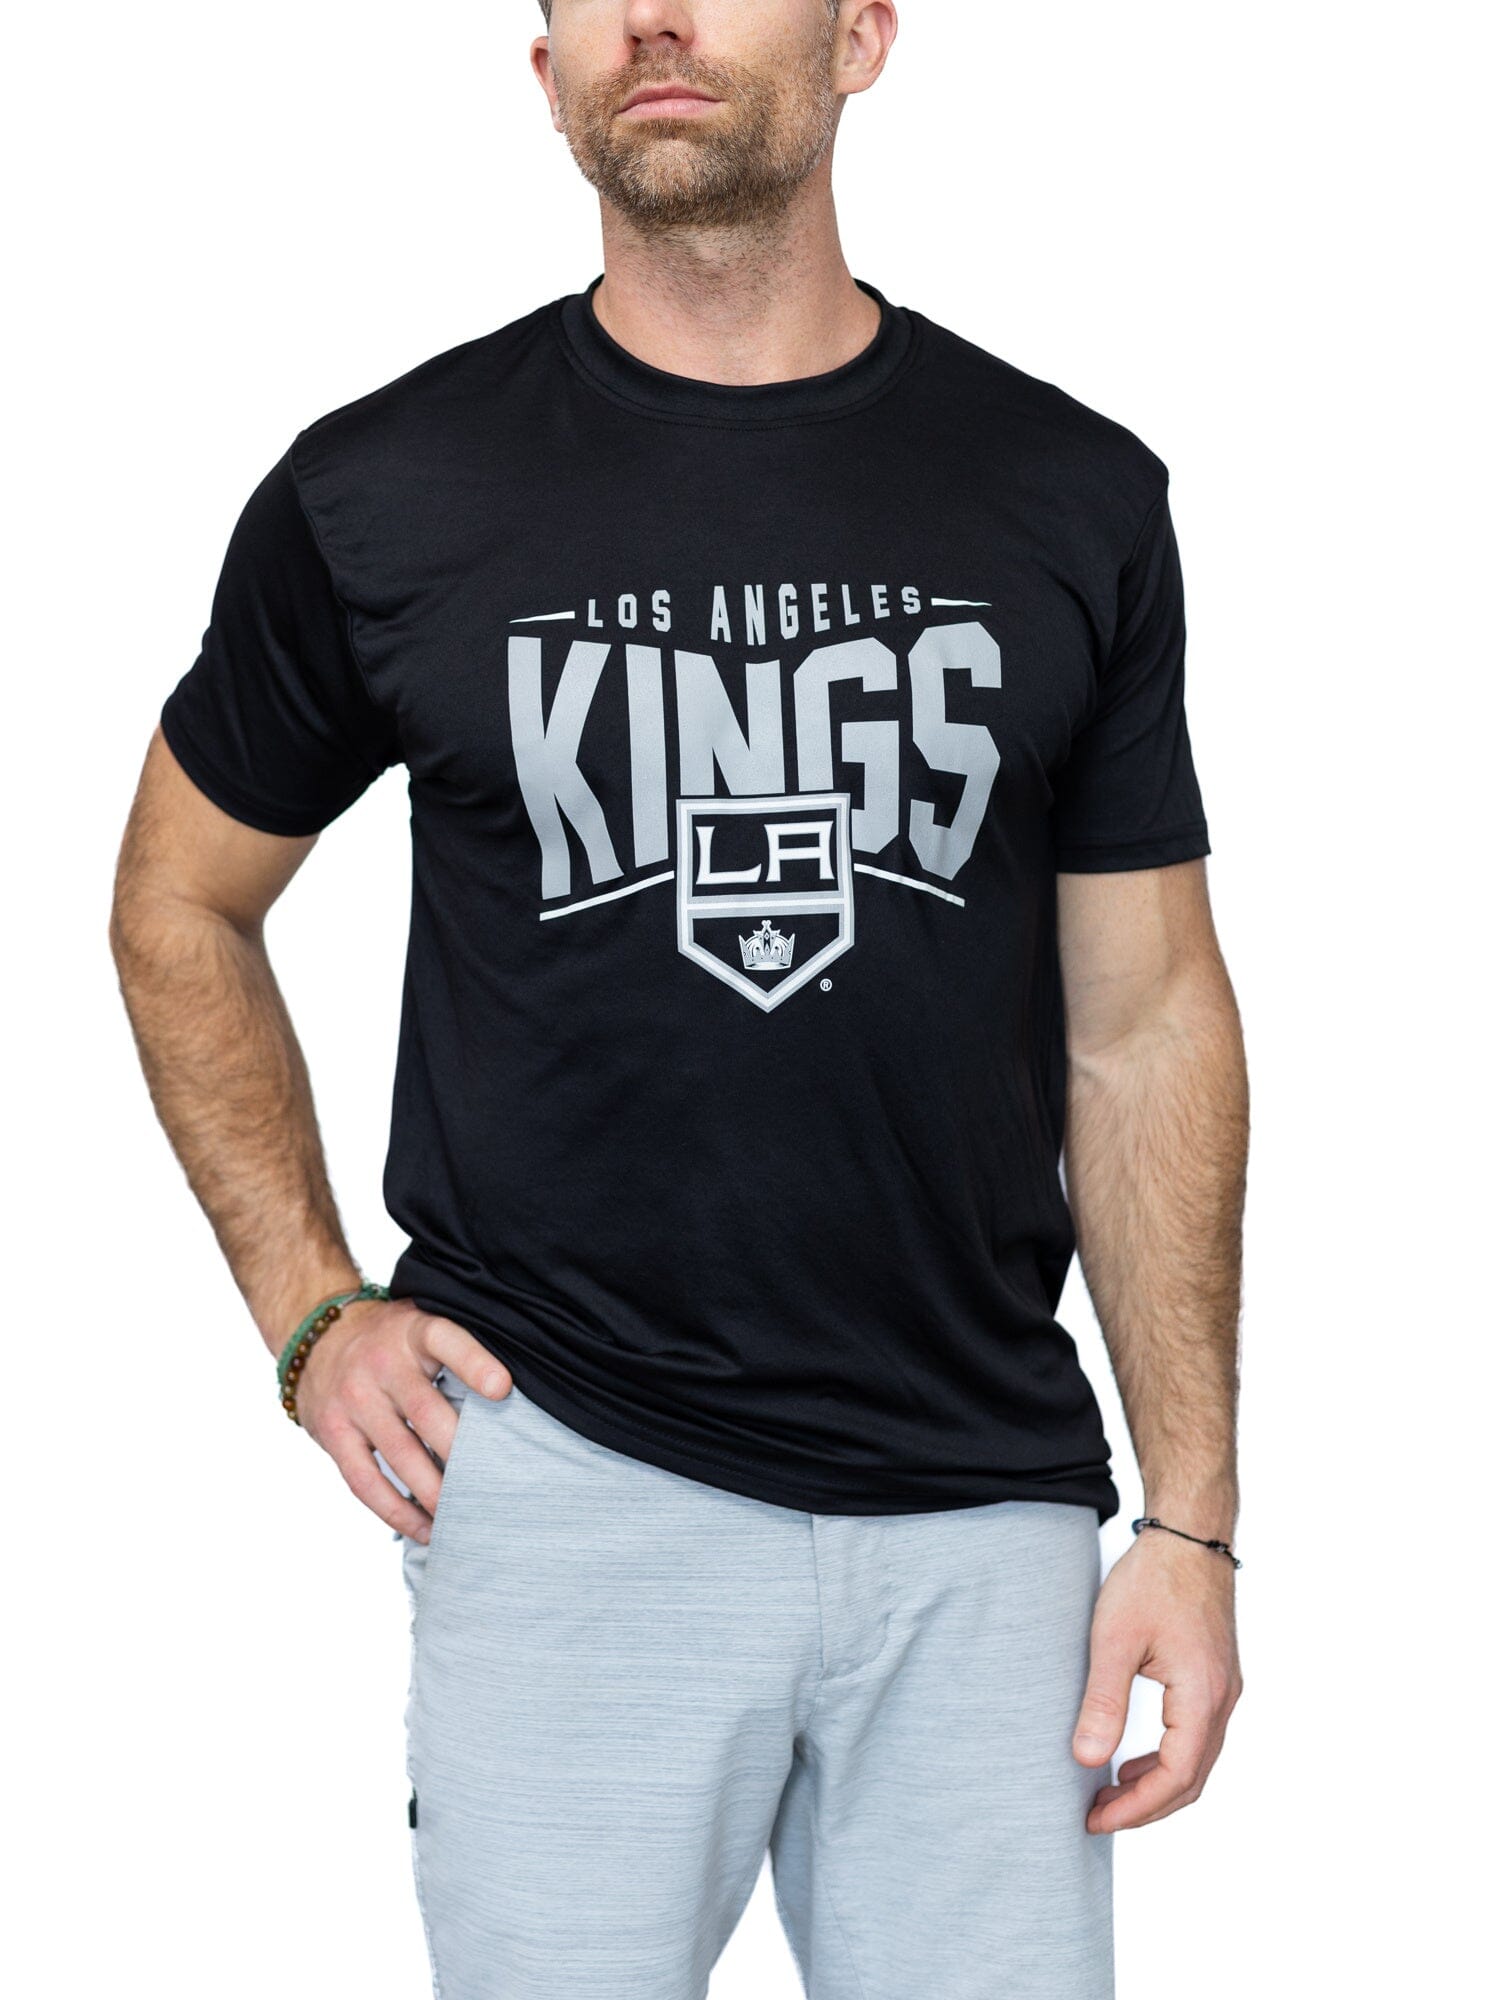 Los Angeles Kings "Full Fandom" Moisture Wicking T-Shirt T-Shirt BenchClearers S Black Polyester